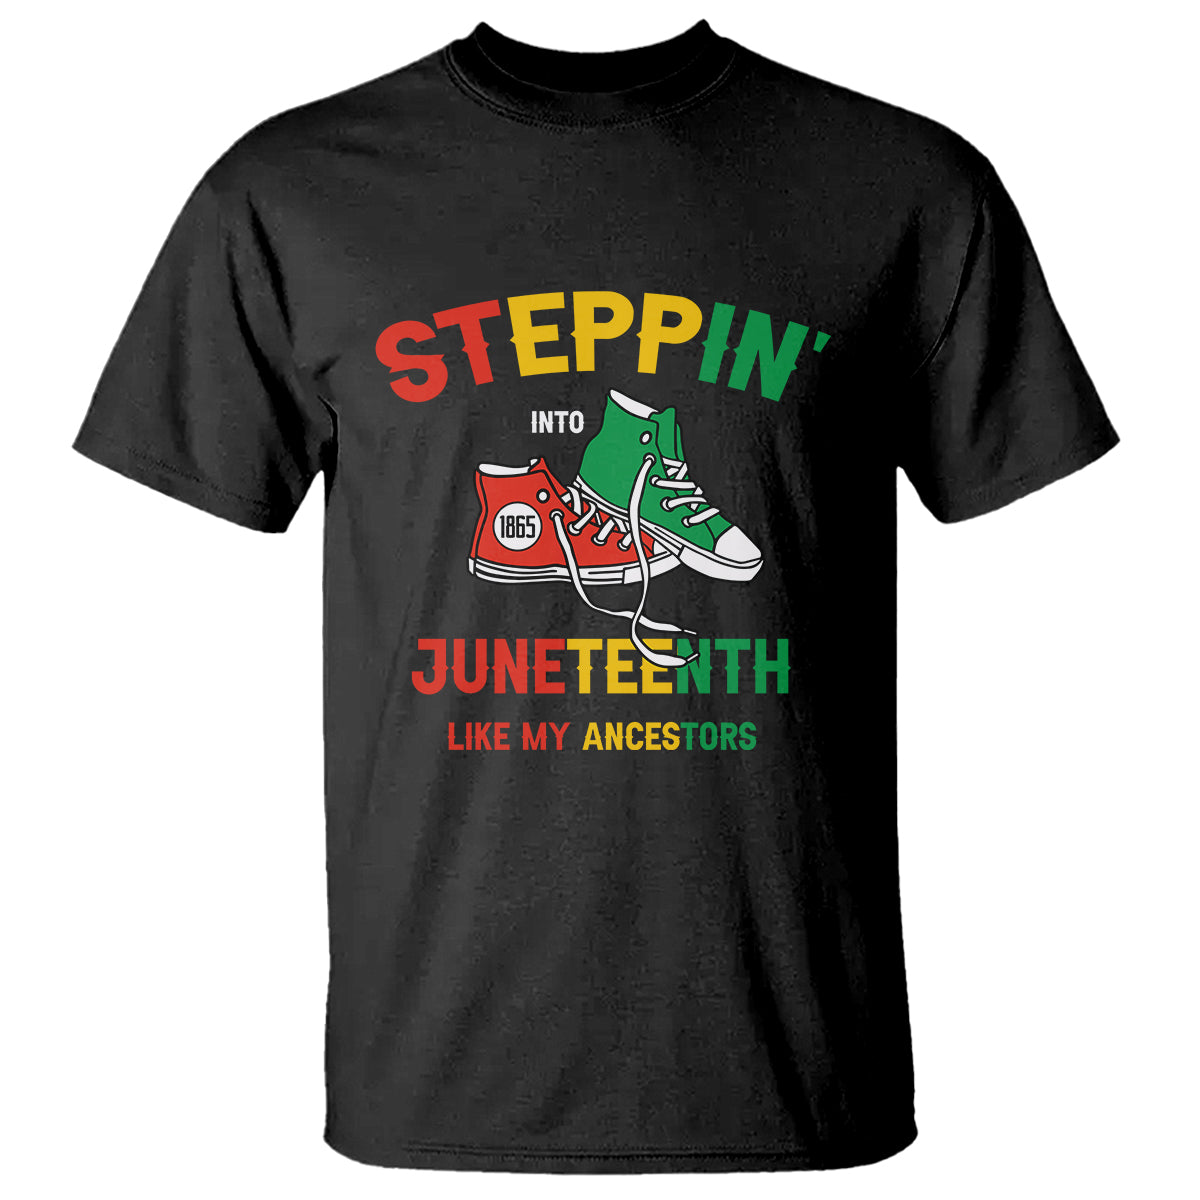 Stepping into Juneteenth T Shirt Like My Ancestors Sneakers 1865